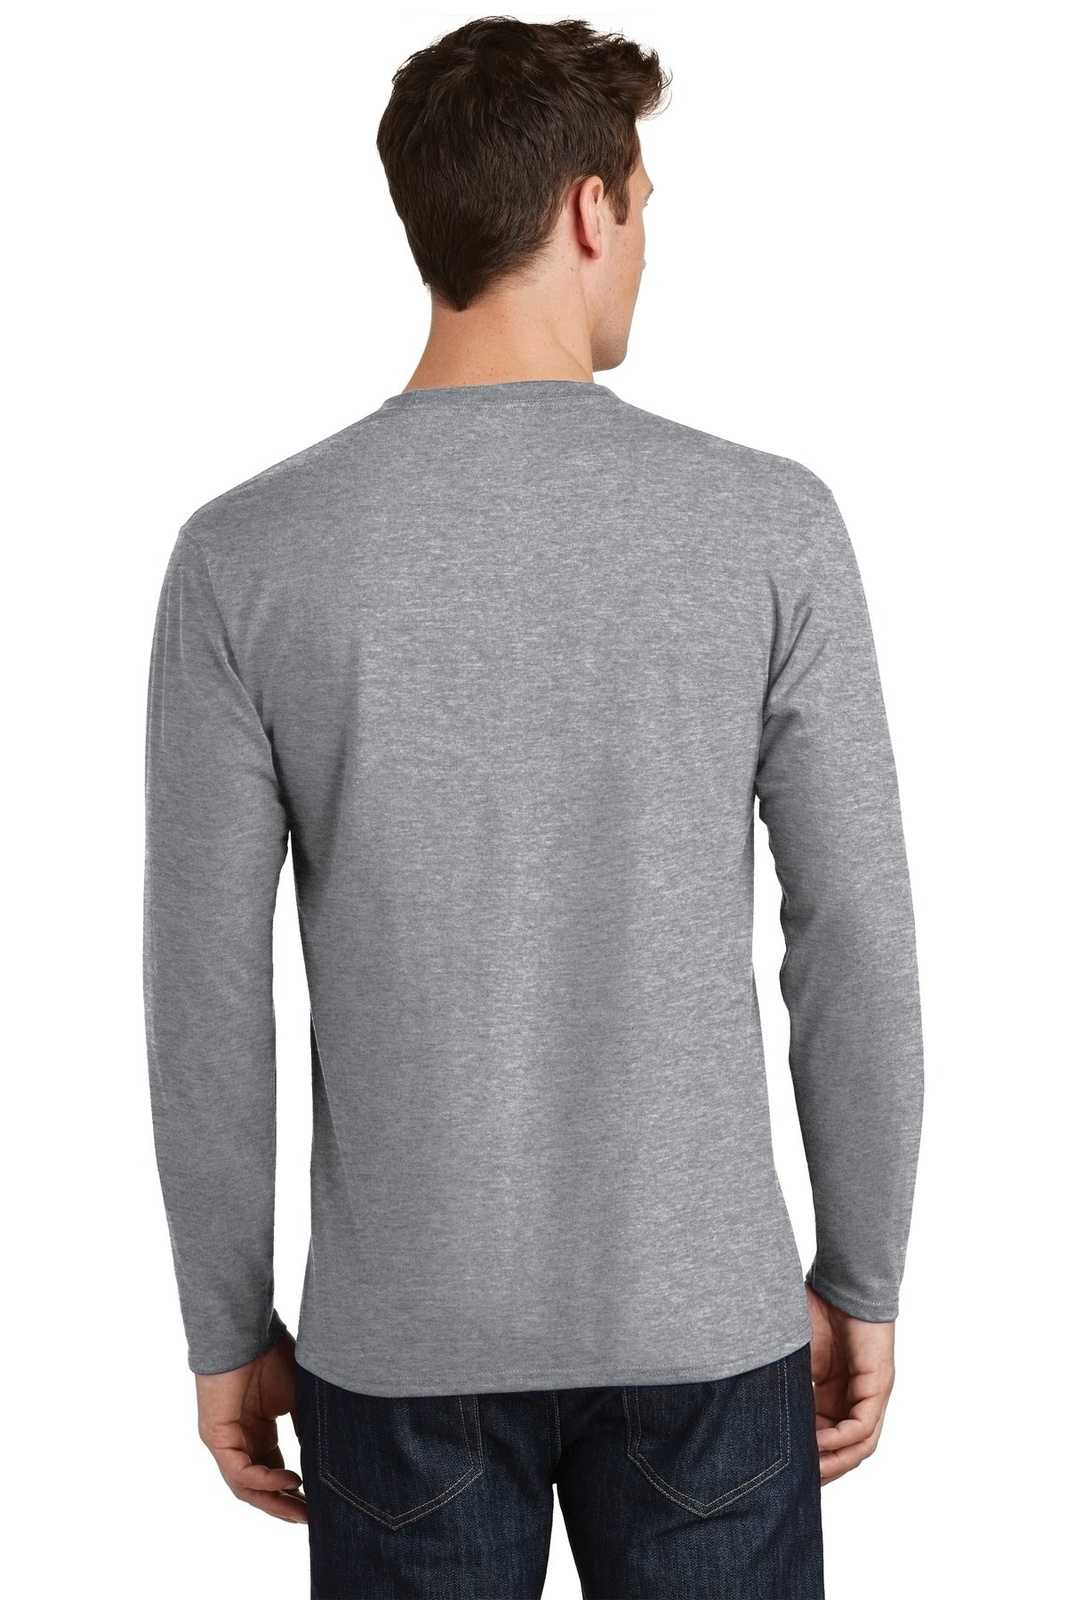 Port & Company PC450LS Long Sleeve Fan Favorite Tee - Athletic Heather - HIT a Double - 1